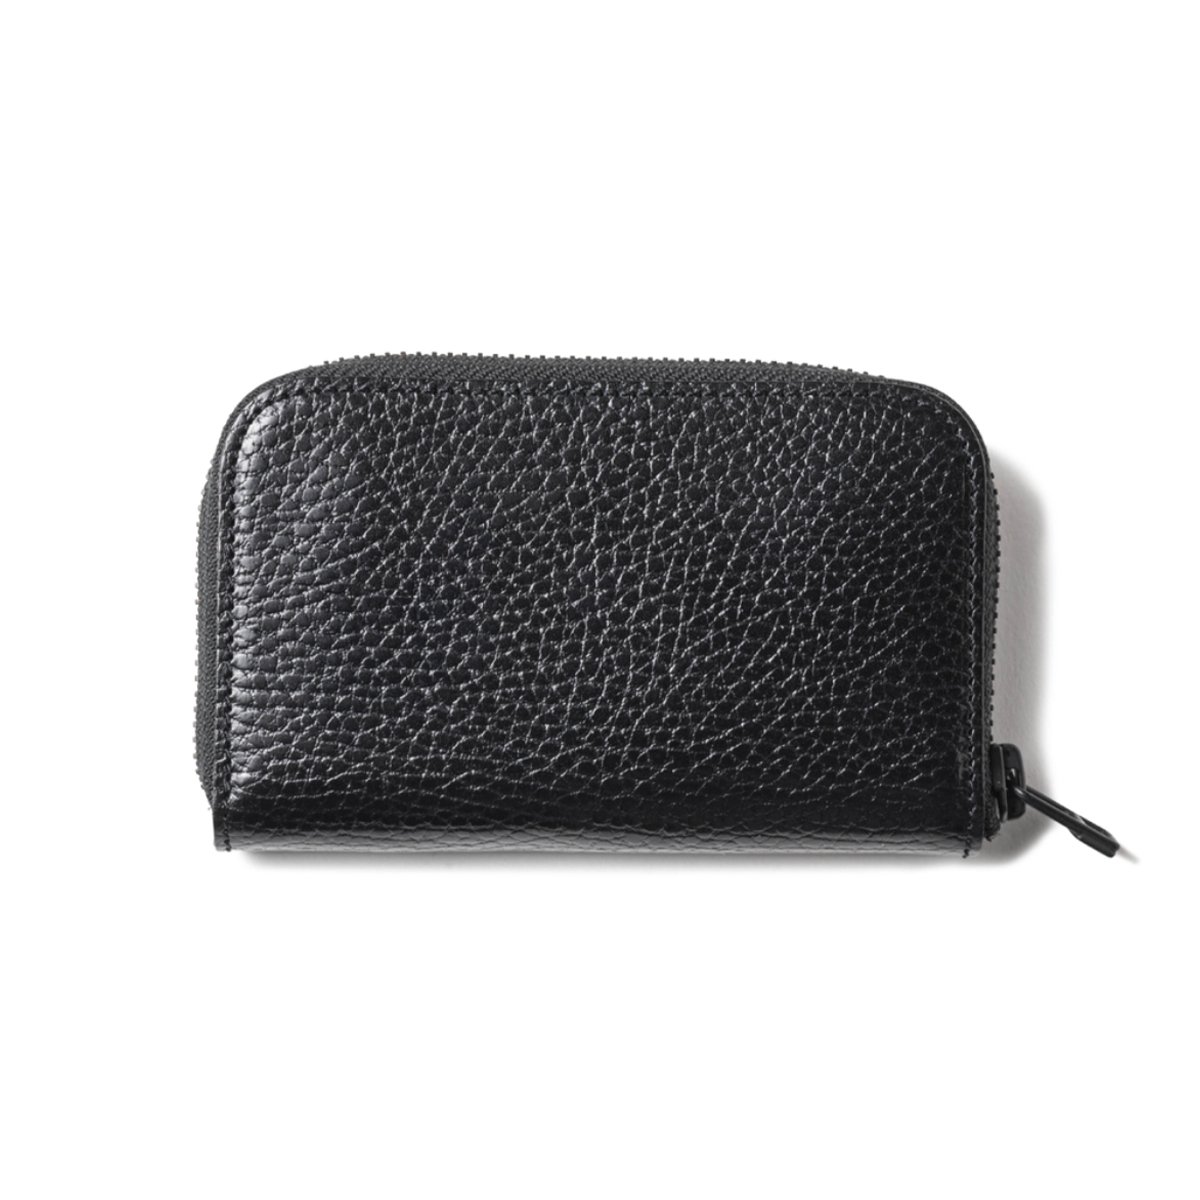 TIGHTBOOTH】Leather Zip Around Wallet (Black)- LIEON SHARE